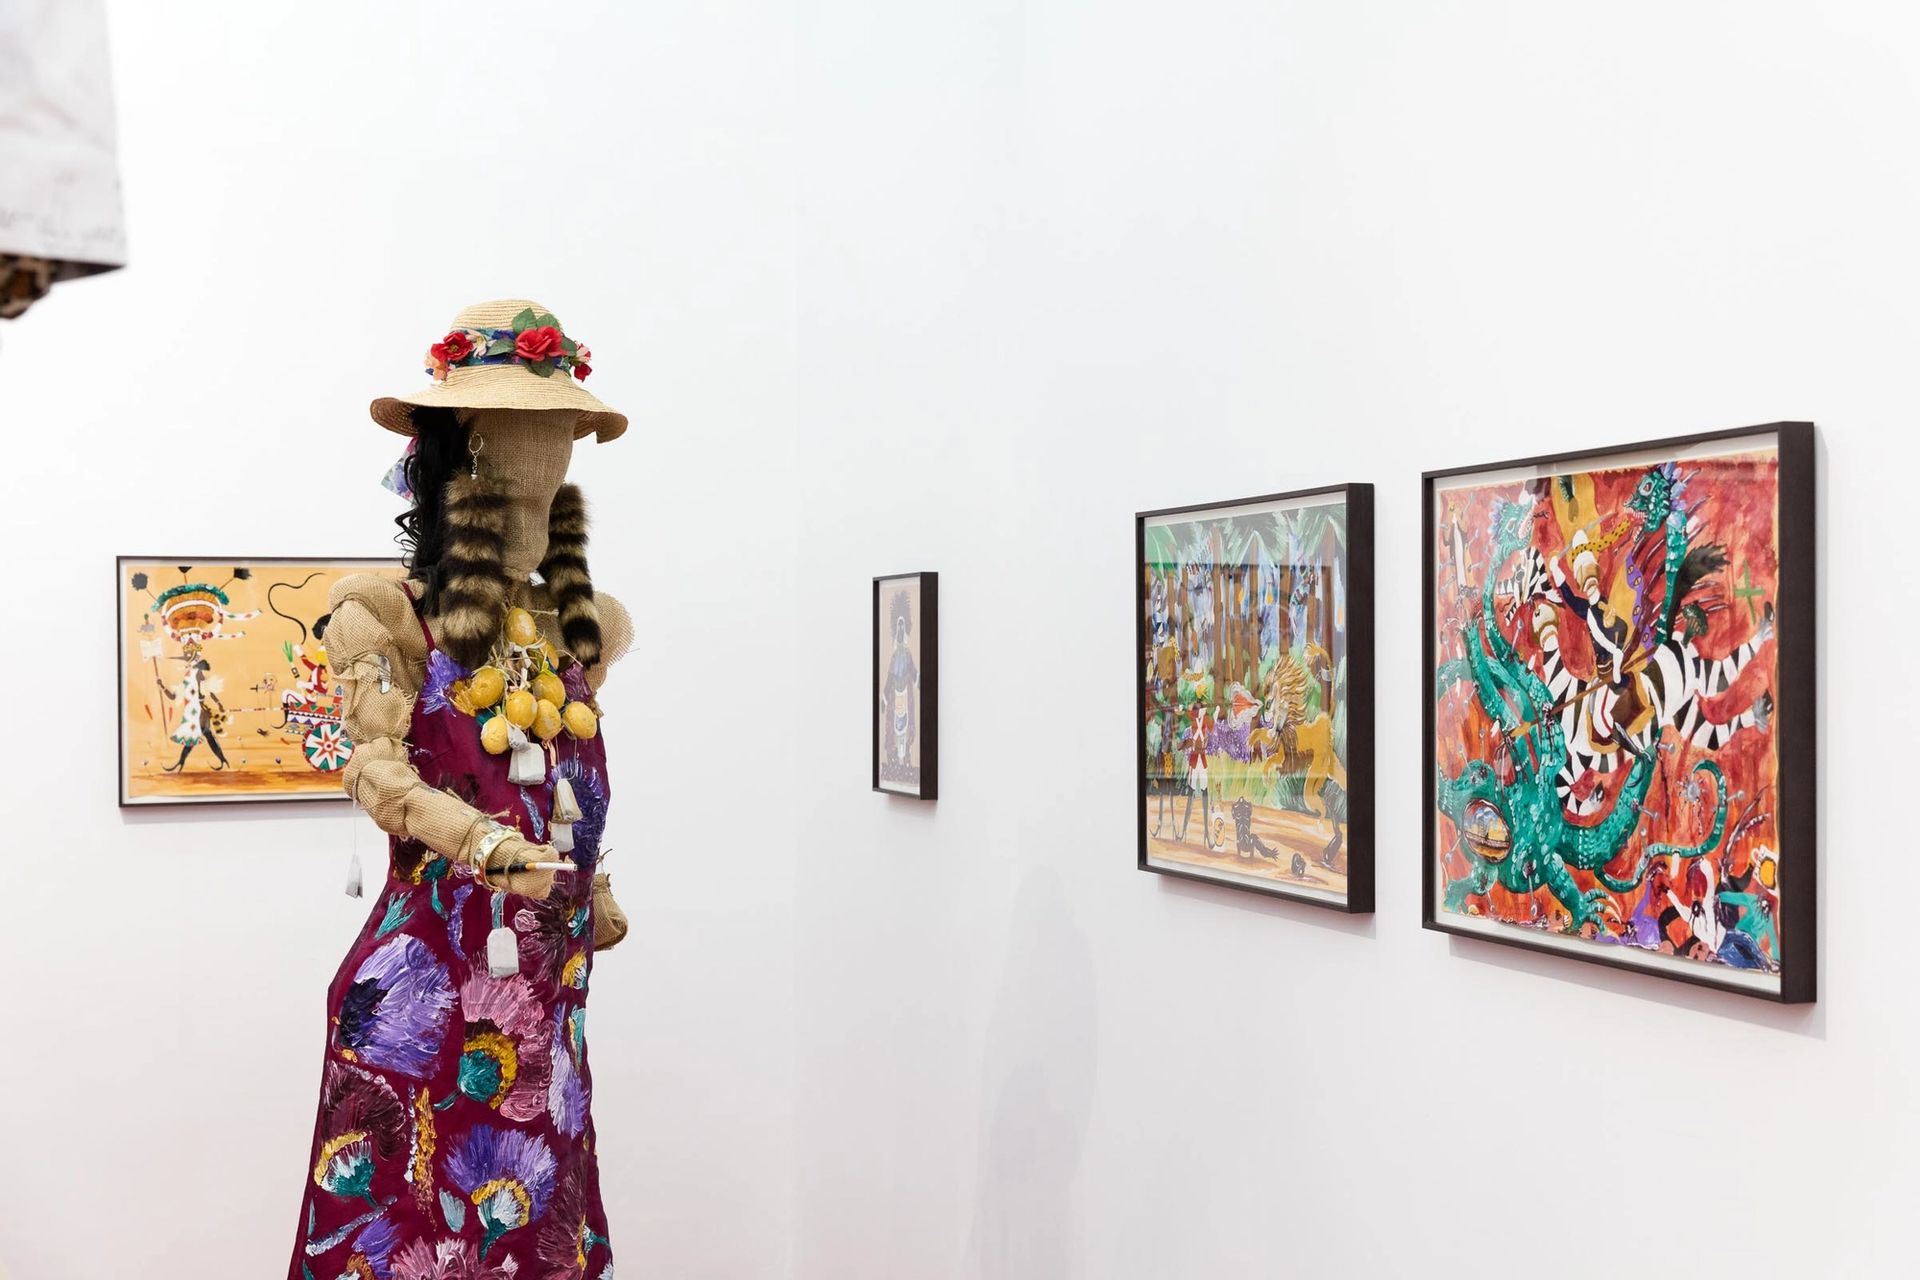 Installation view: Andrew Gilbert, “The Glorious Opening of Emperor Andrew's Museum”, 2018